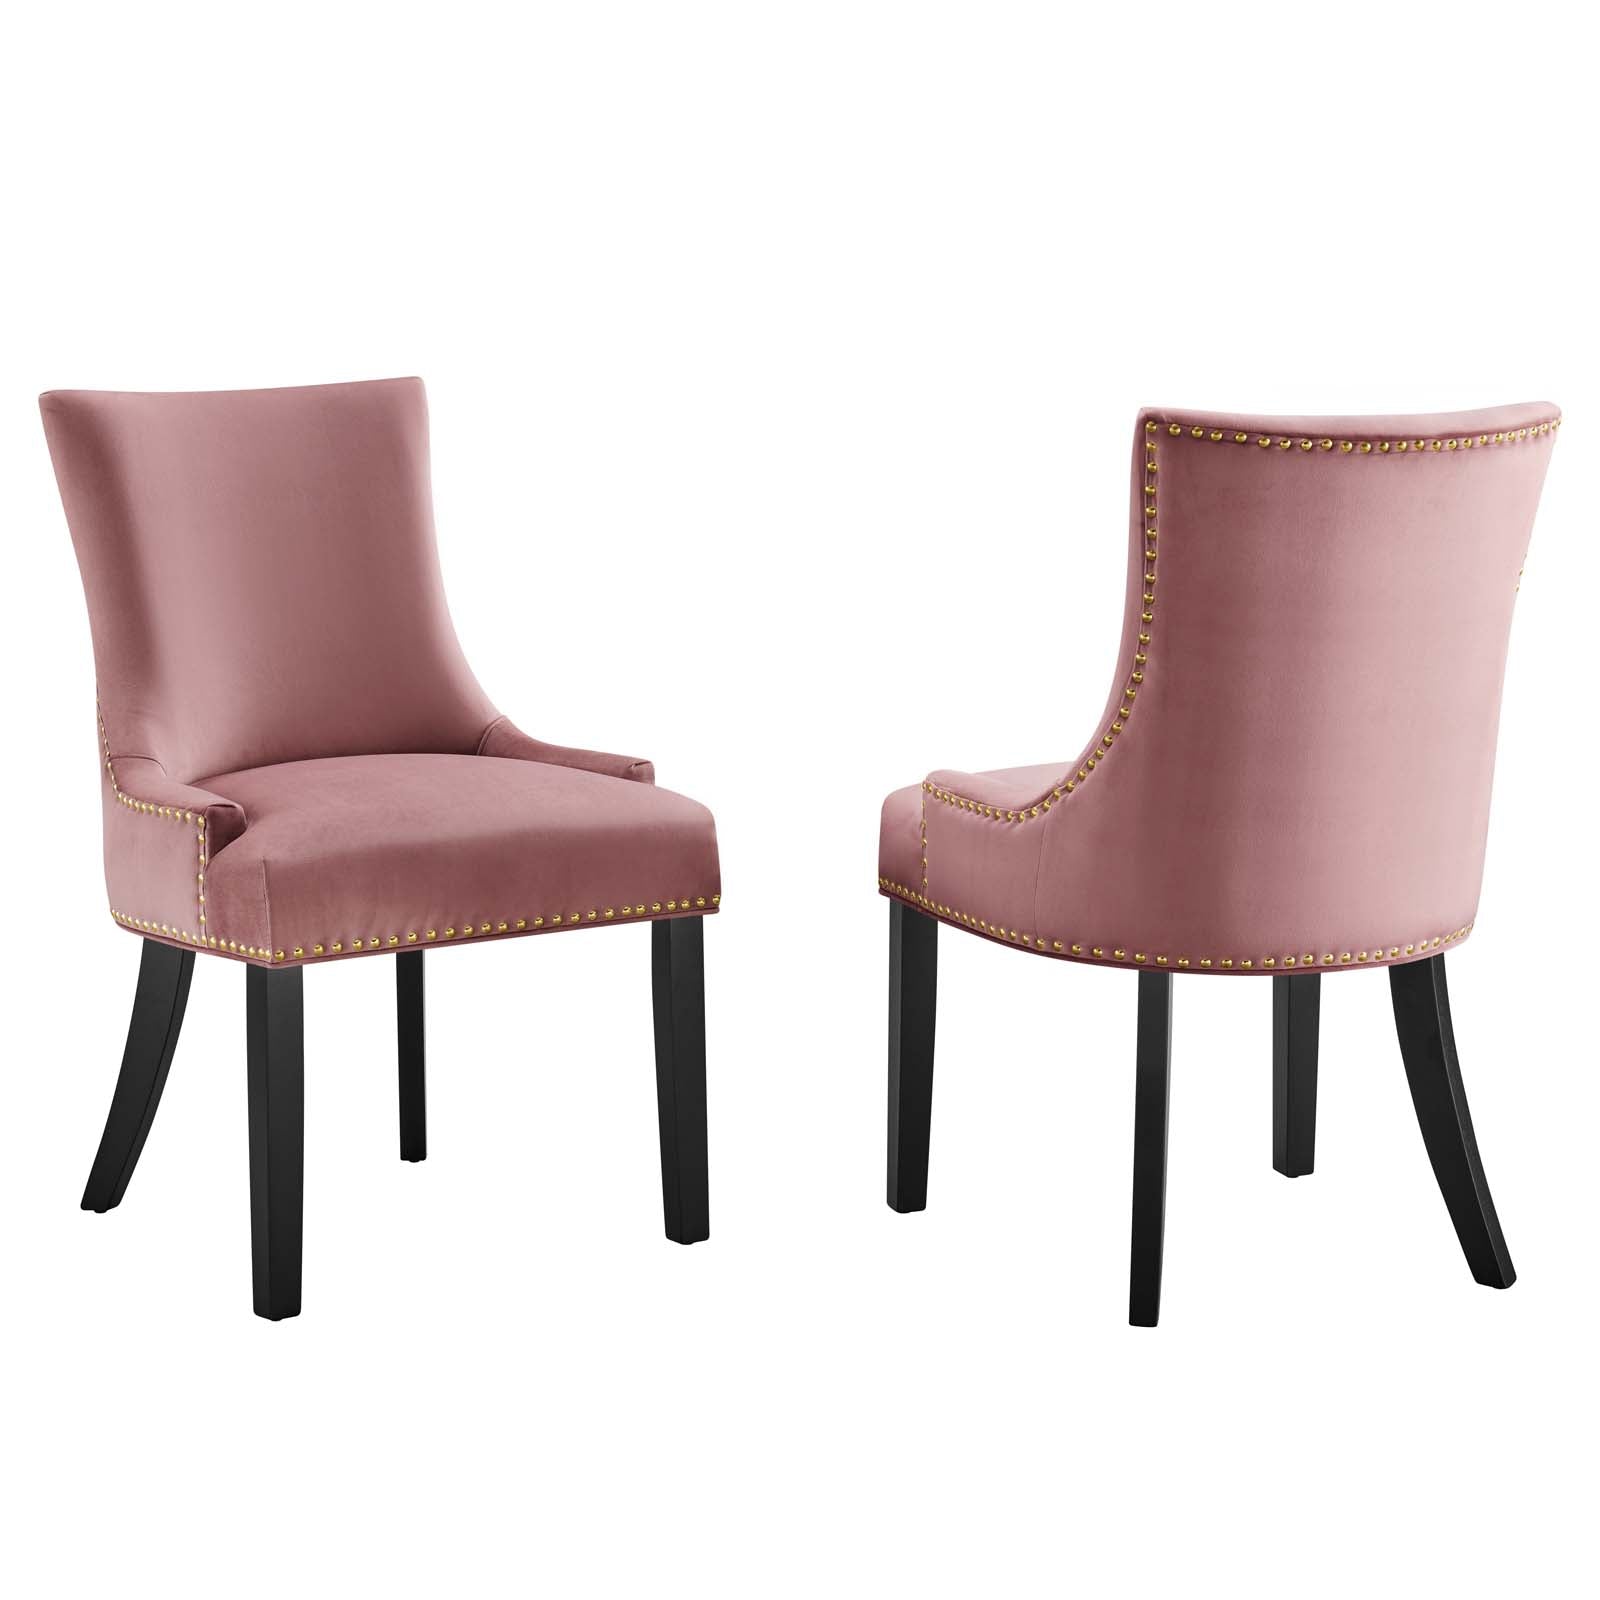 Modway Dining Chairs - Marquis Performance Velvet Dining Chairs - Set of 2 Dusty Rose